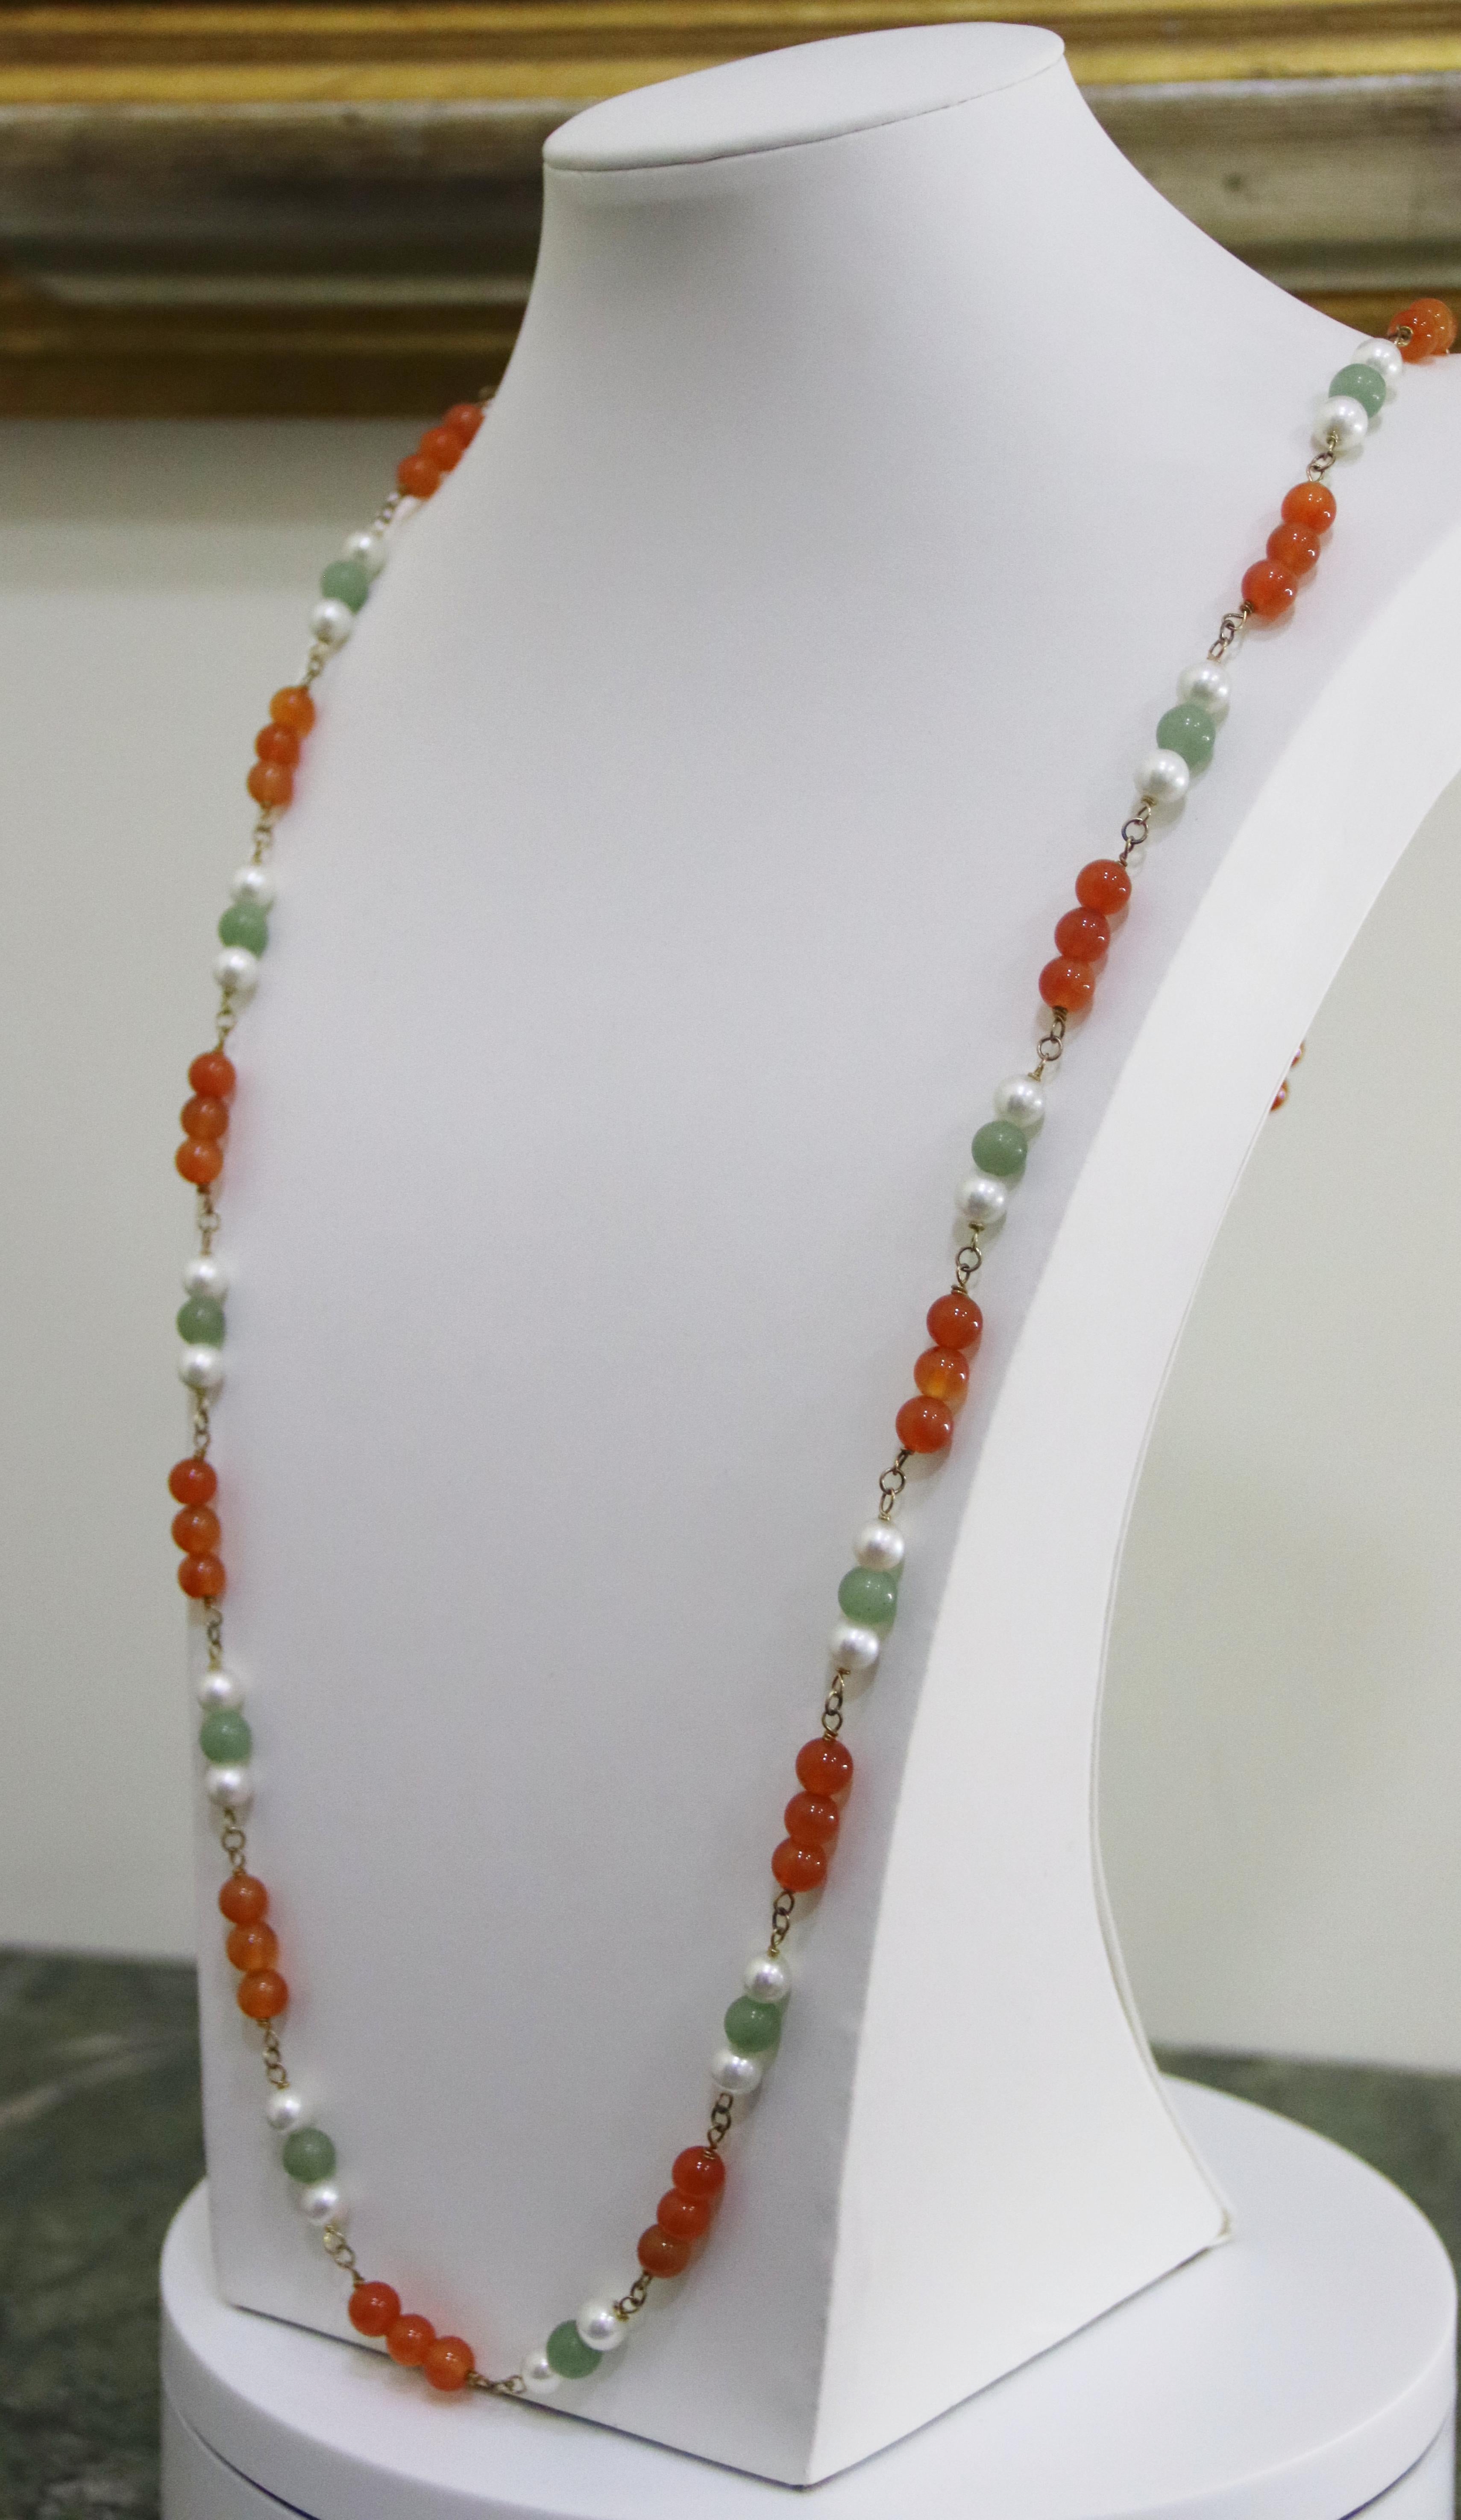 Women's Handcraft Pearls 800 Thousandths Silver Carnelian Agate Beaded Necklace For Sale